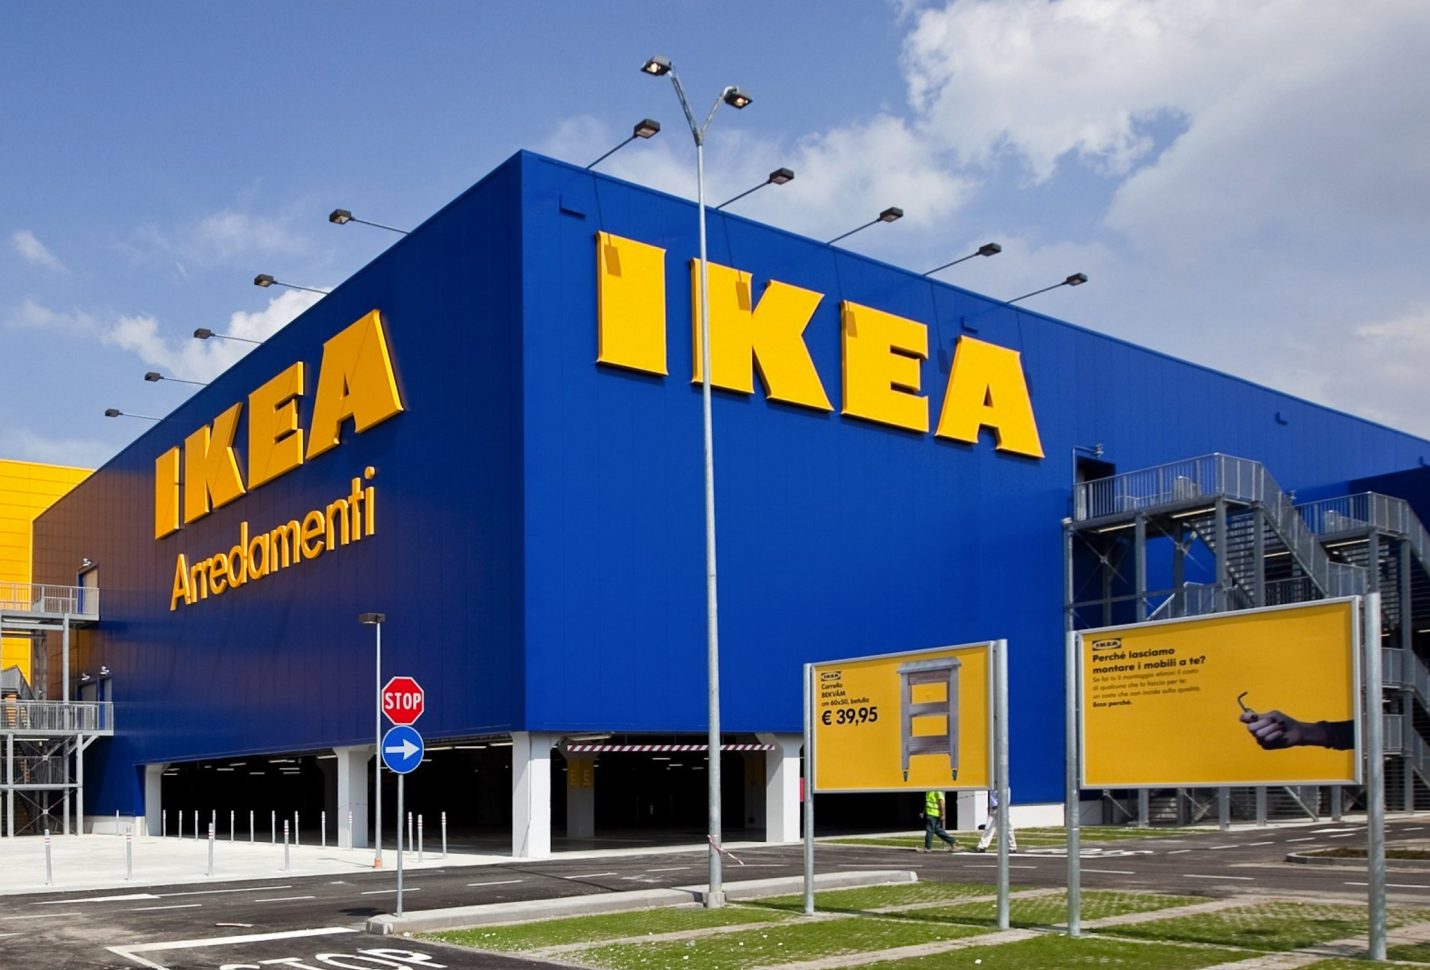 IKea’s climate footprint in FY 22 down 5% compared to last year – report 